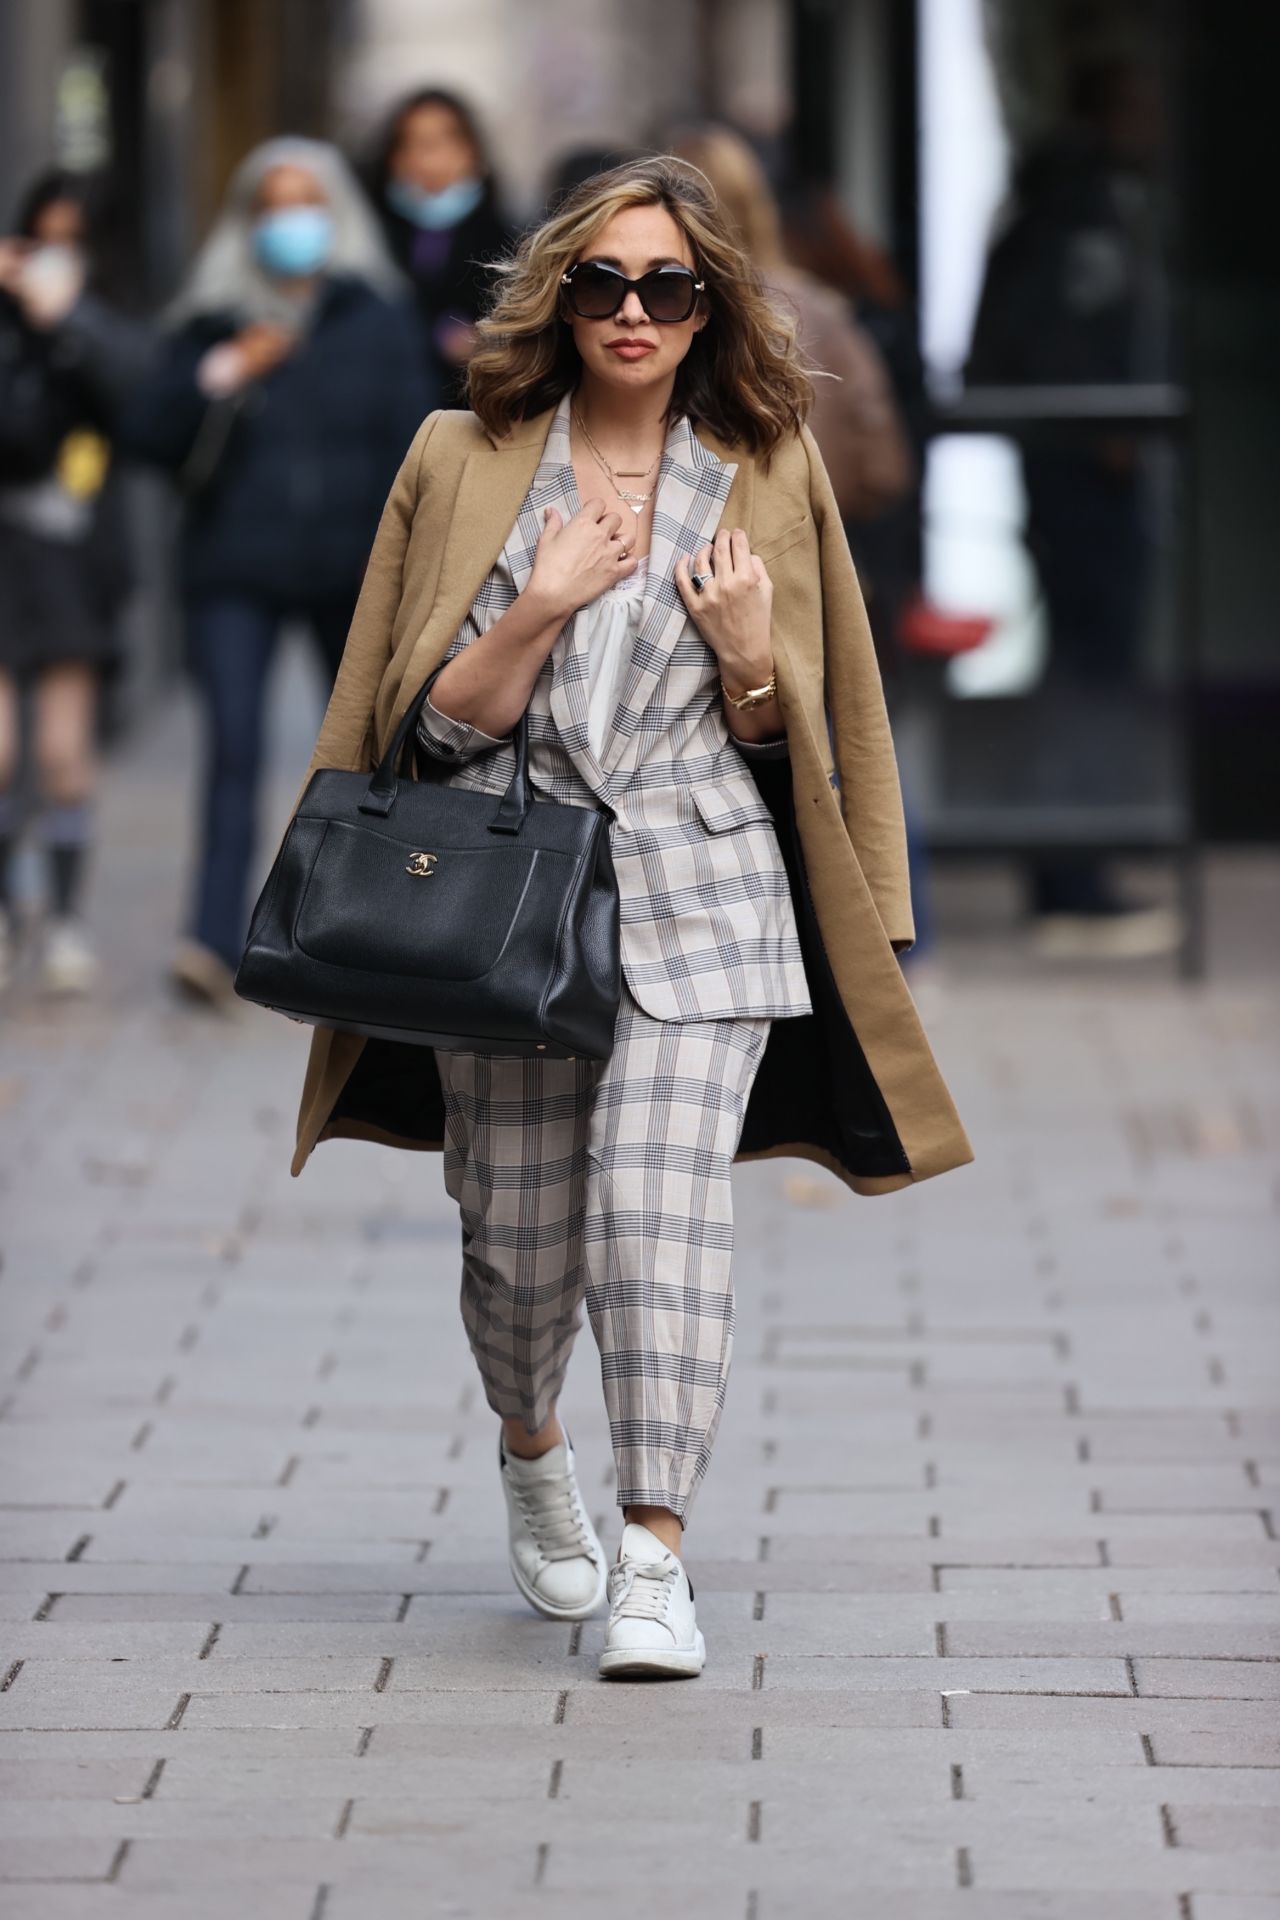 Myleene Klass in a Checked Suit and Camel Coat - London 10/07/2020 ...